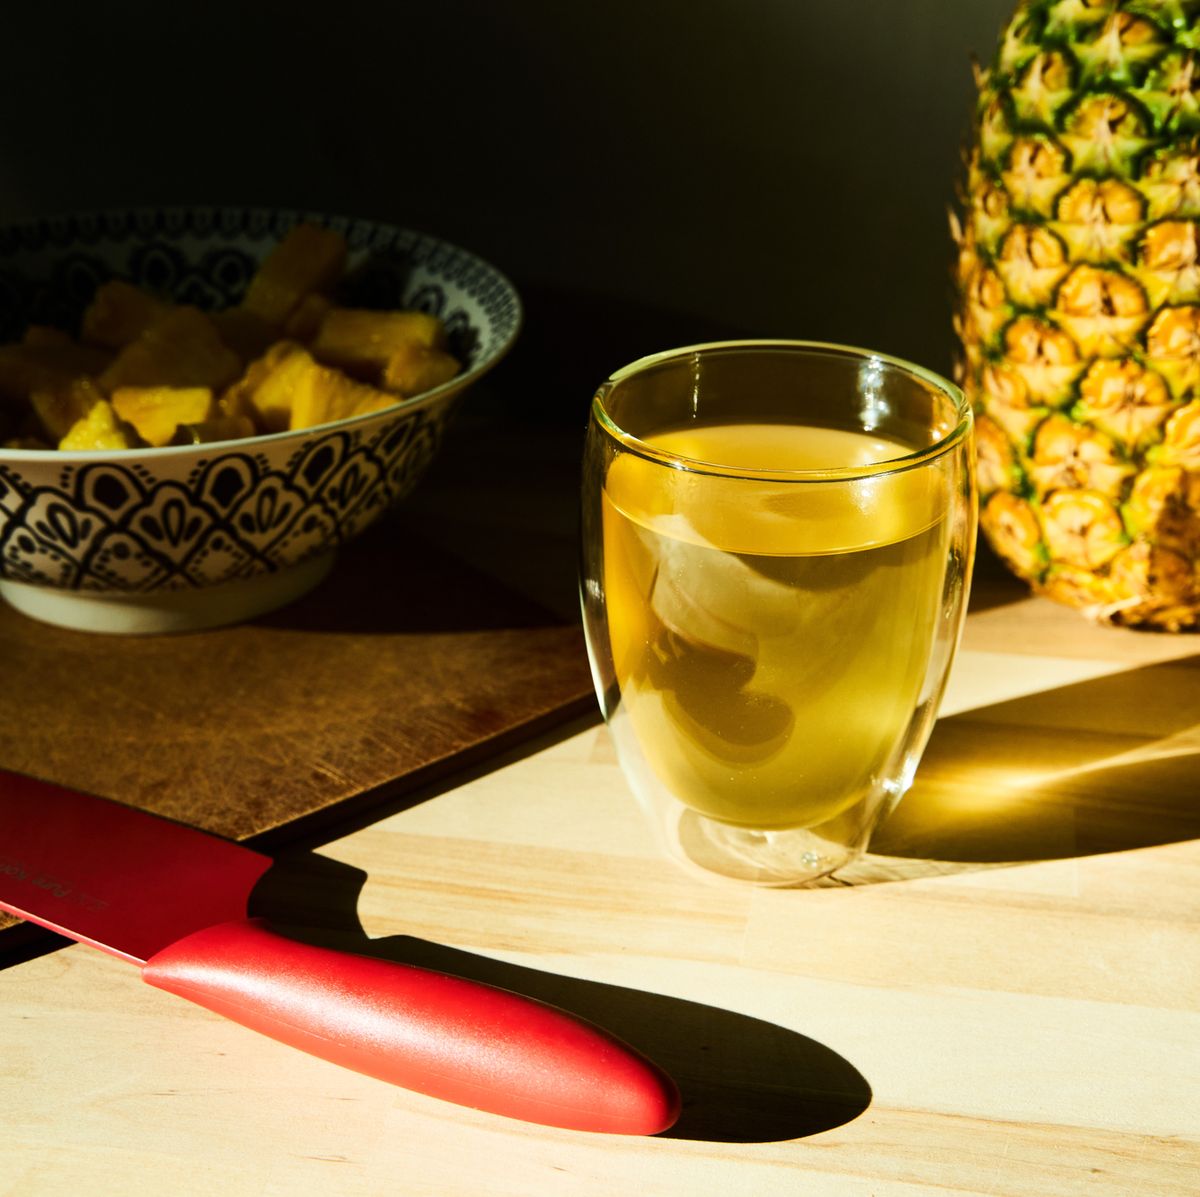 Pineapple Tea: Is It Healthy and Good for Cyclists?